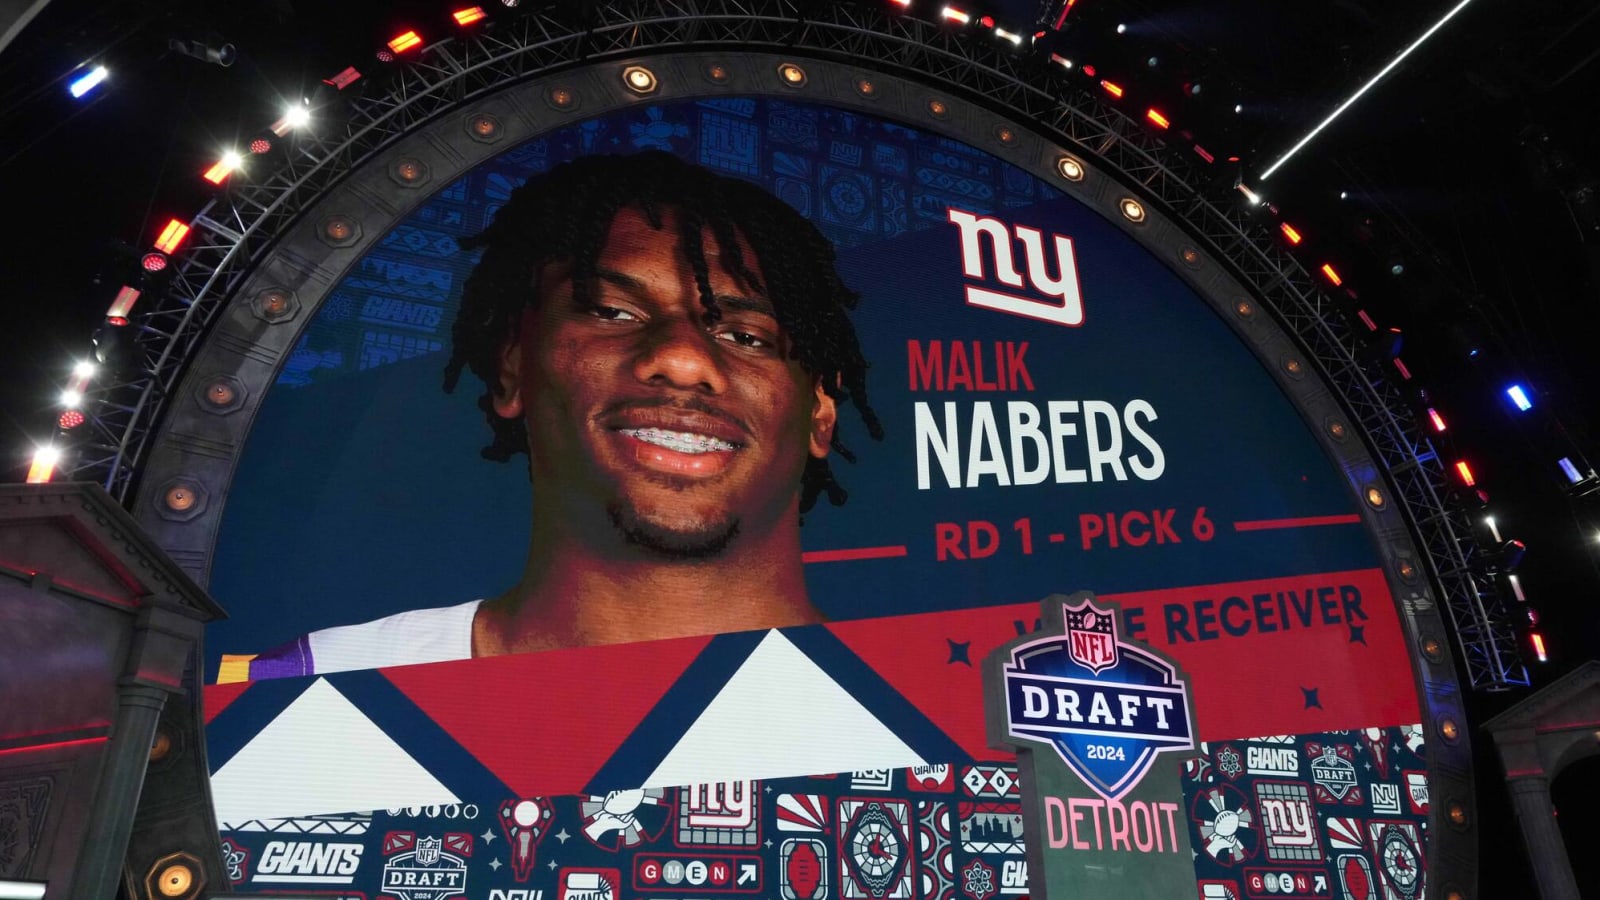 Giants sign 6th overall pick to $29 million rookie deal